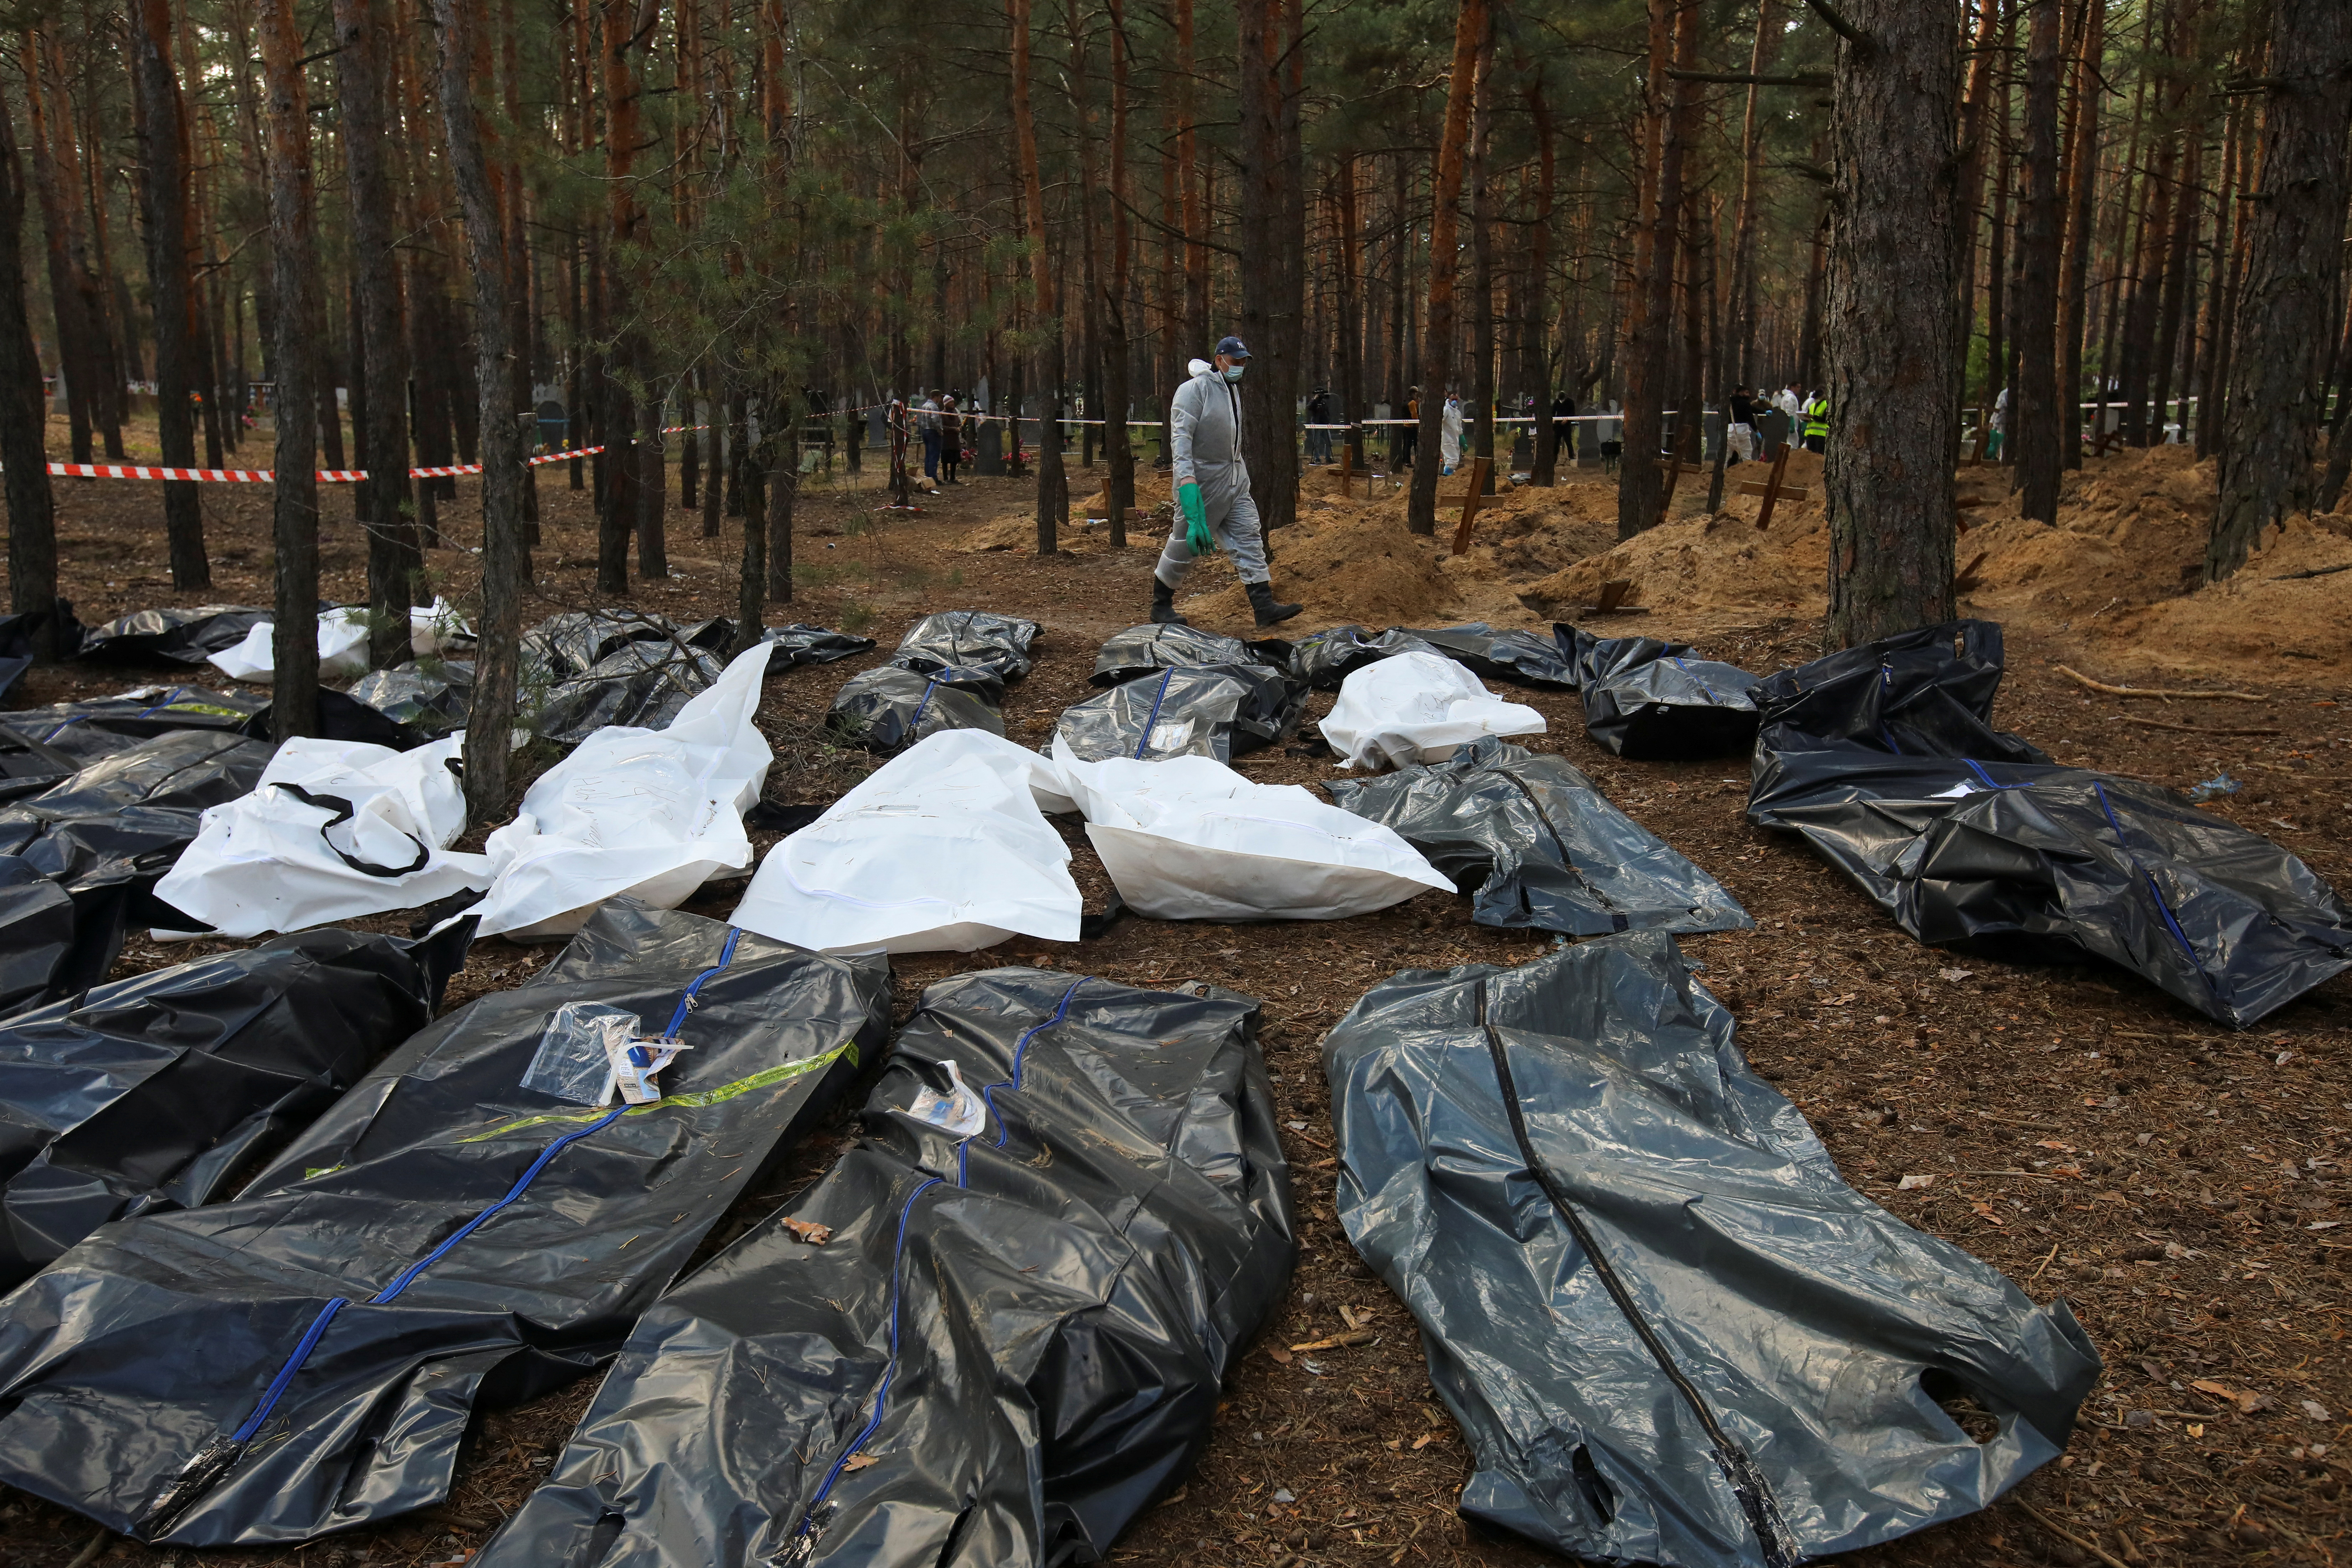 Exhumation of bodies in the Izium area of ​​Kharkiv, a region recently liberated by Ukrainian forces (Reuters)